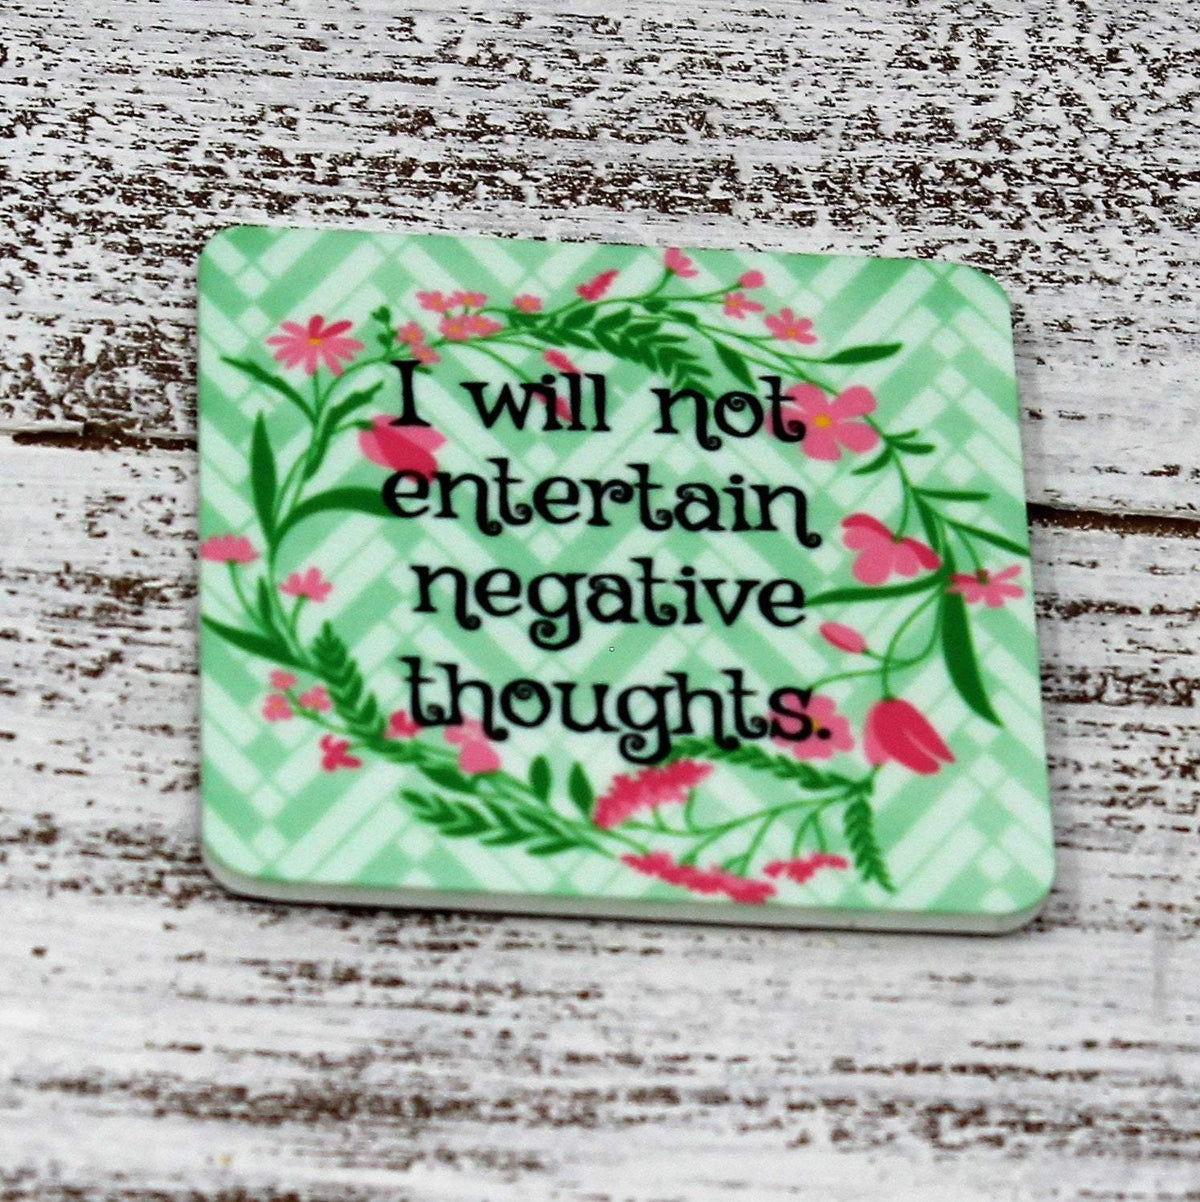 Personalized Magnet | Custom Photo Magnet | Negative Thoughts - This &amp; That Solutions - Personalized Magnet | Custom Photo Magnet | Negative Thoughts - Personalized Gifts &amp; Custom Home Decor